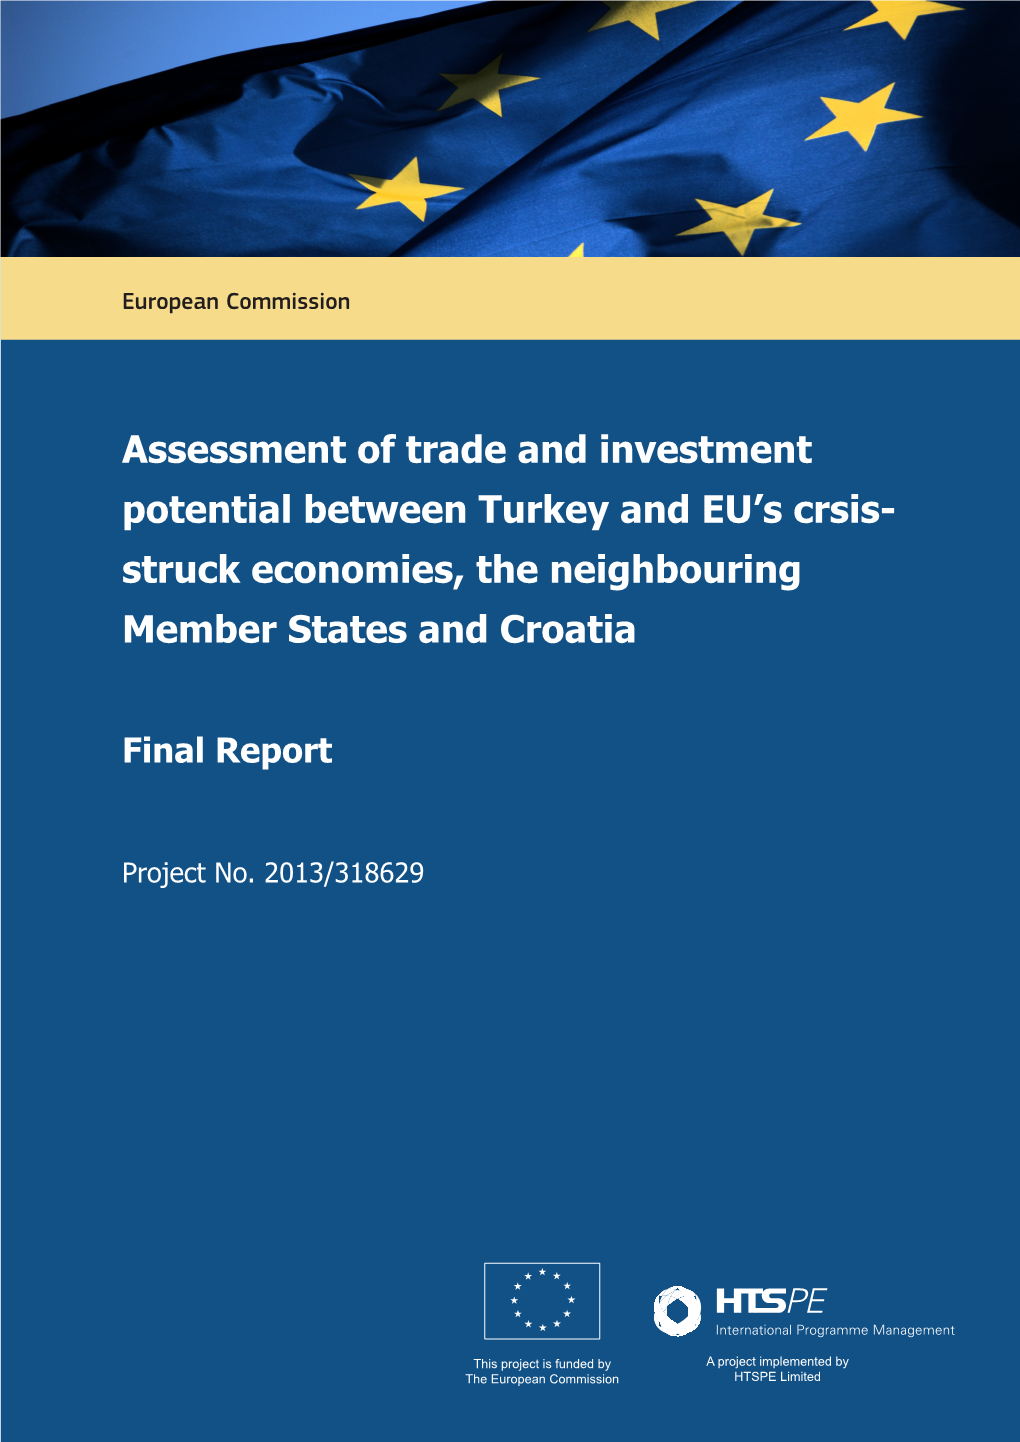 Assessment of Trade and Investment Potential Between Turkey and EU's